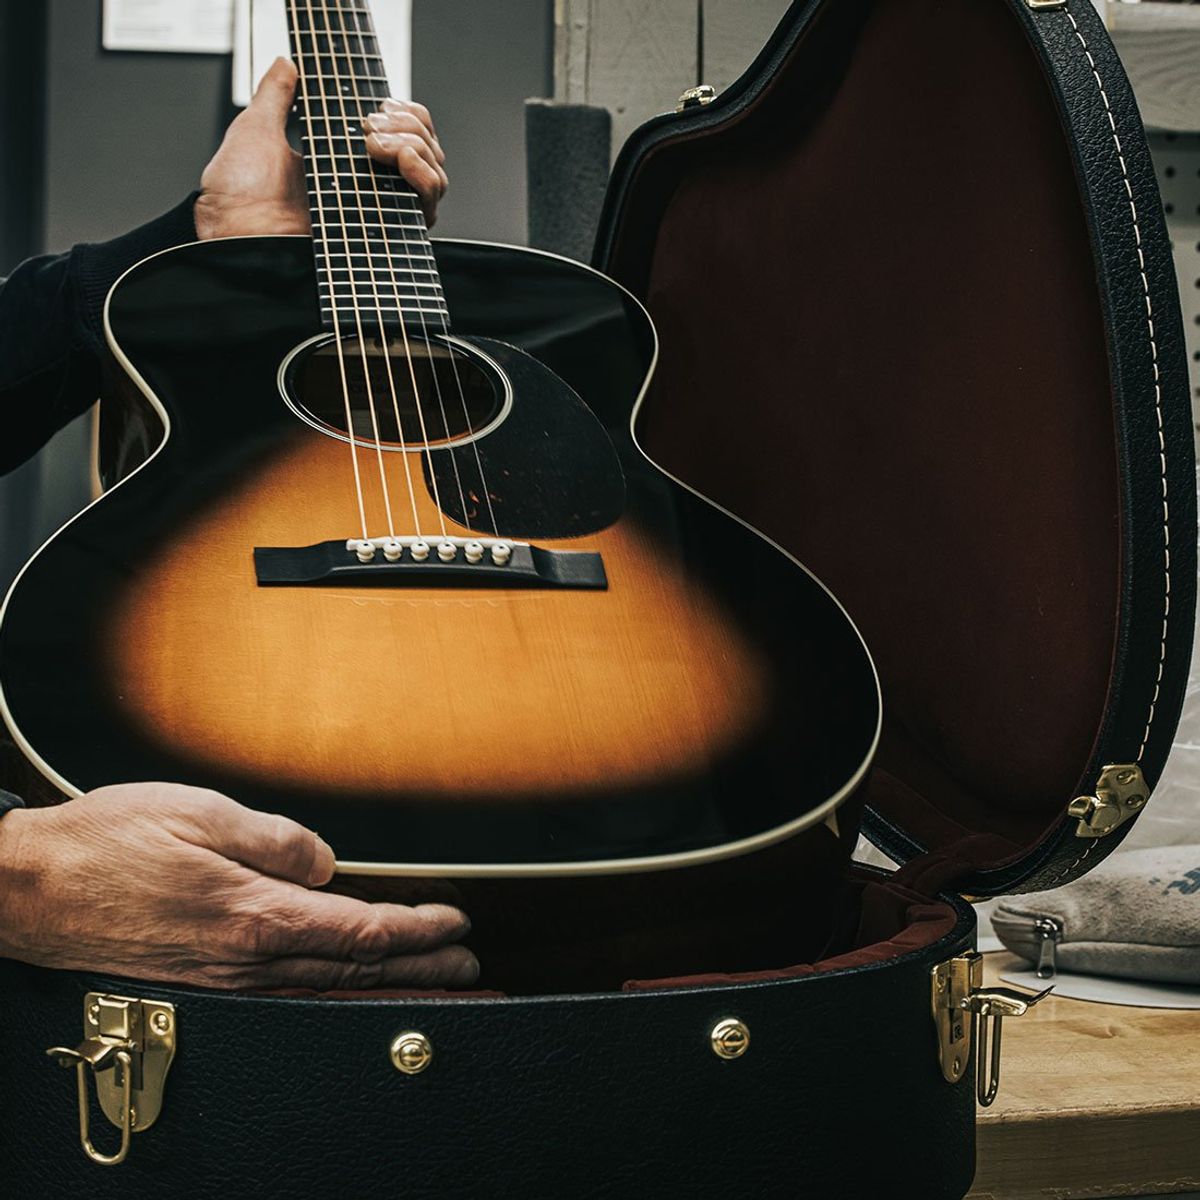 Is Your Acoustic Guitar Ready for the Big Melt?